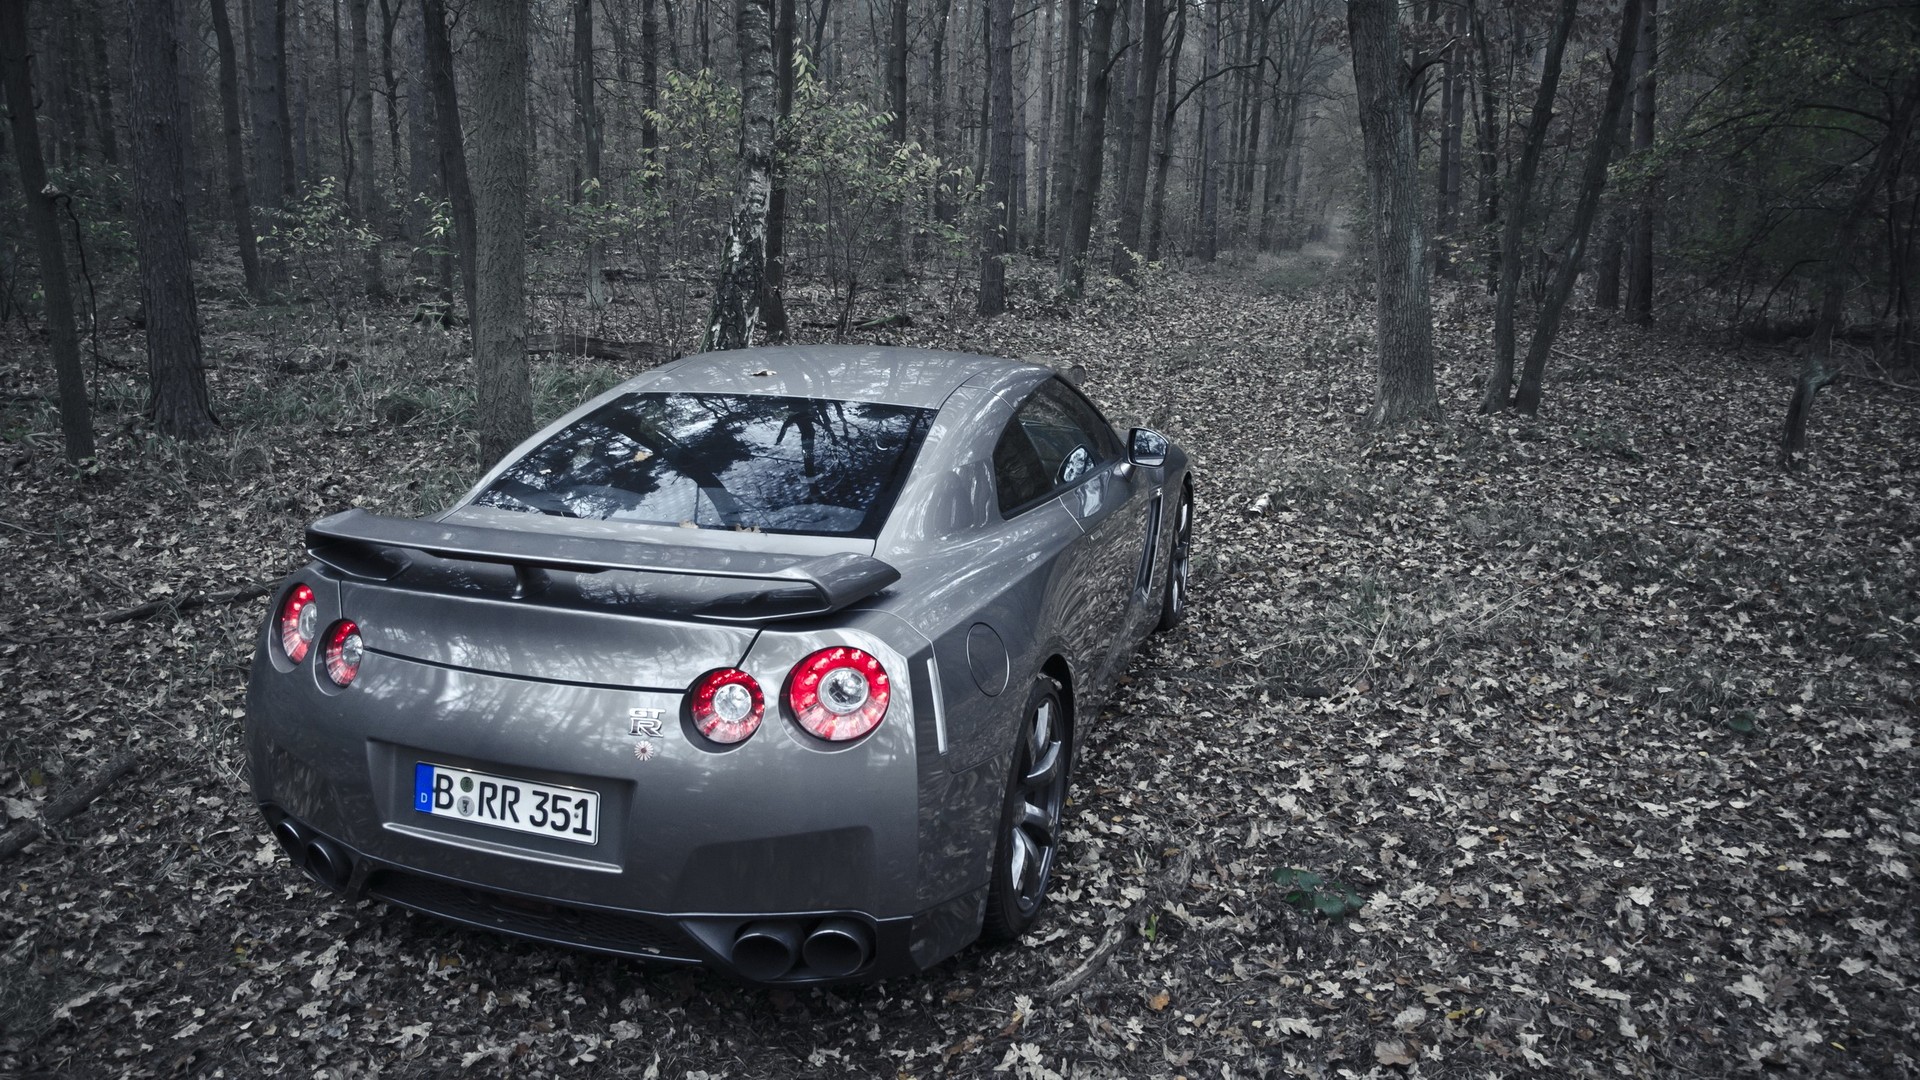 cars, Races, Jdm, Japanese, Domestic, Market, Racing, Cars, Speed, Automobiles, Nissan, Gt r, R35 Wallpaper